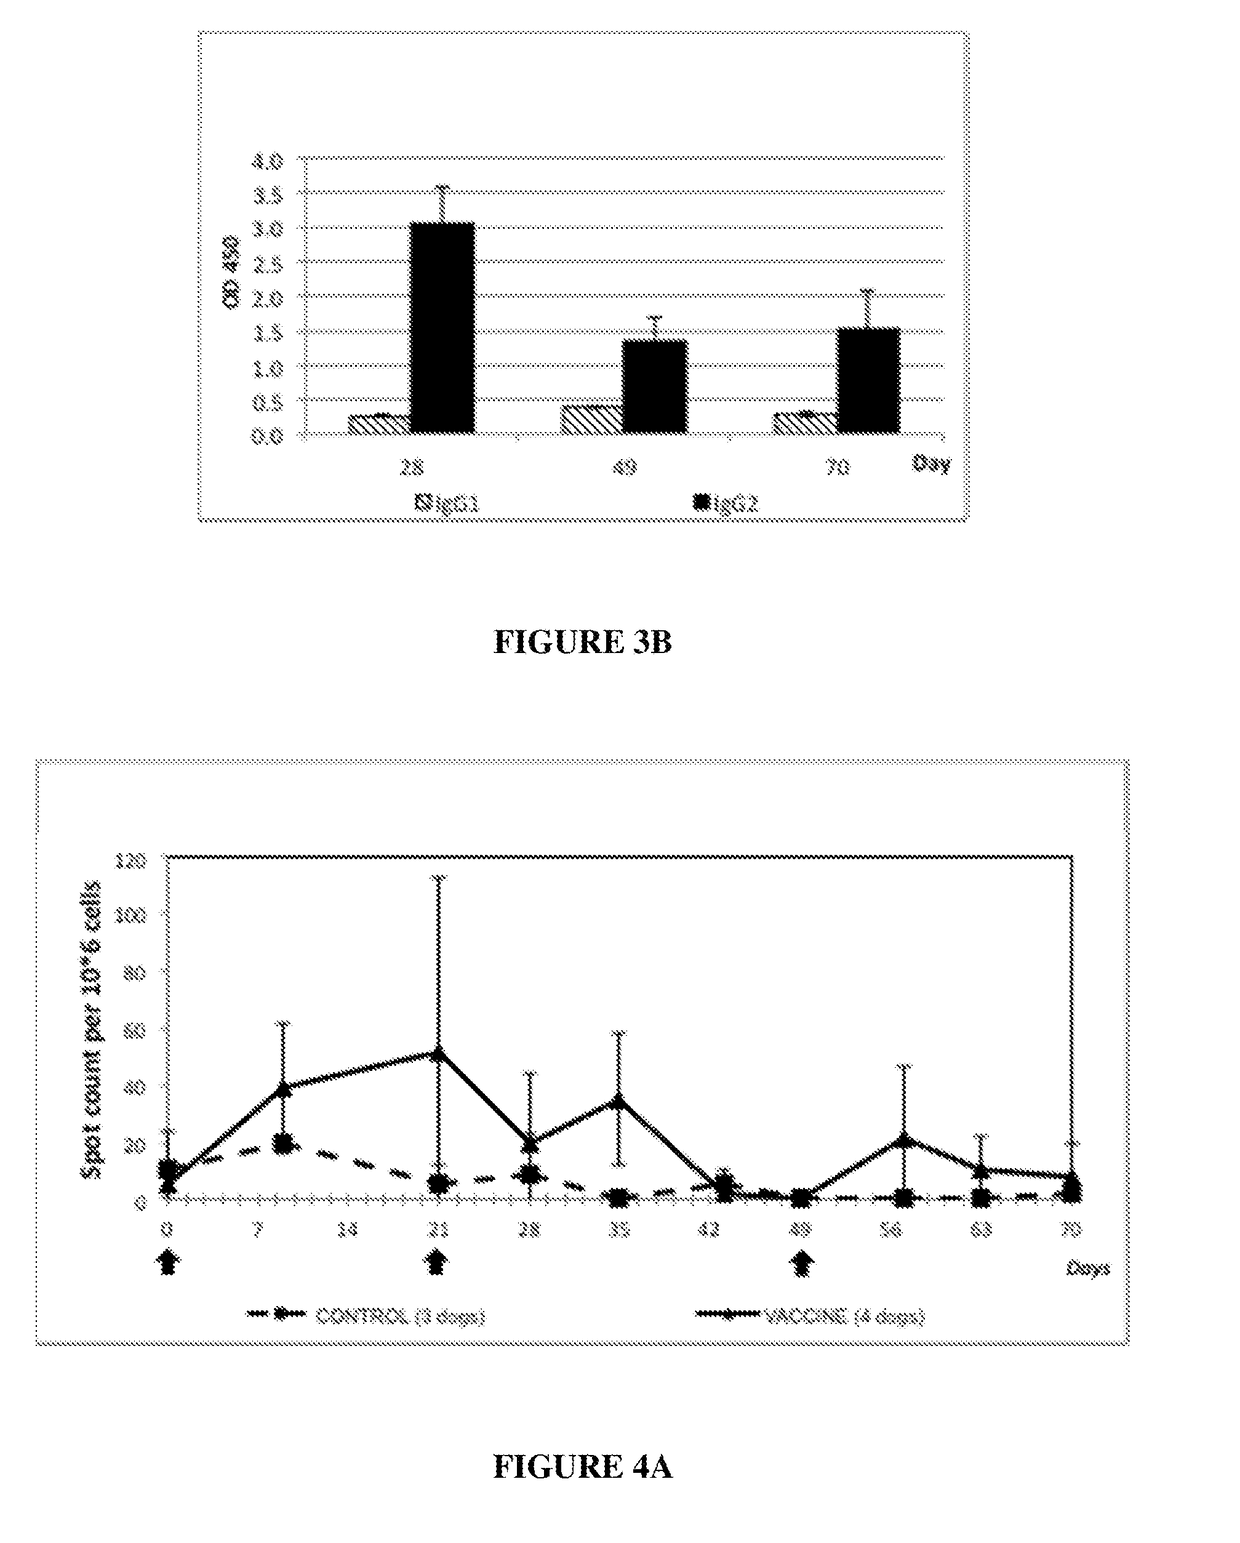 Immunogenic and vaccine compositions for use against bordetella bronchiseptica infection